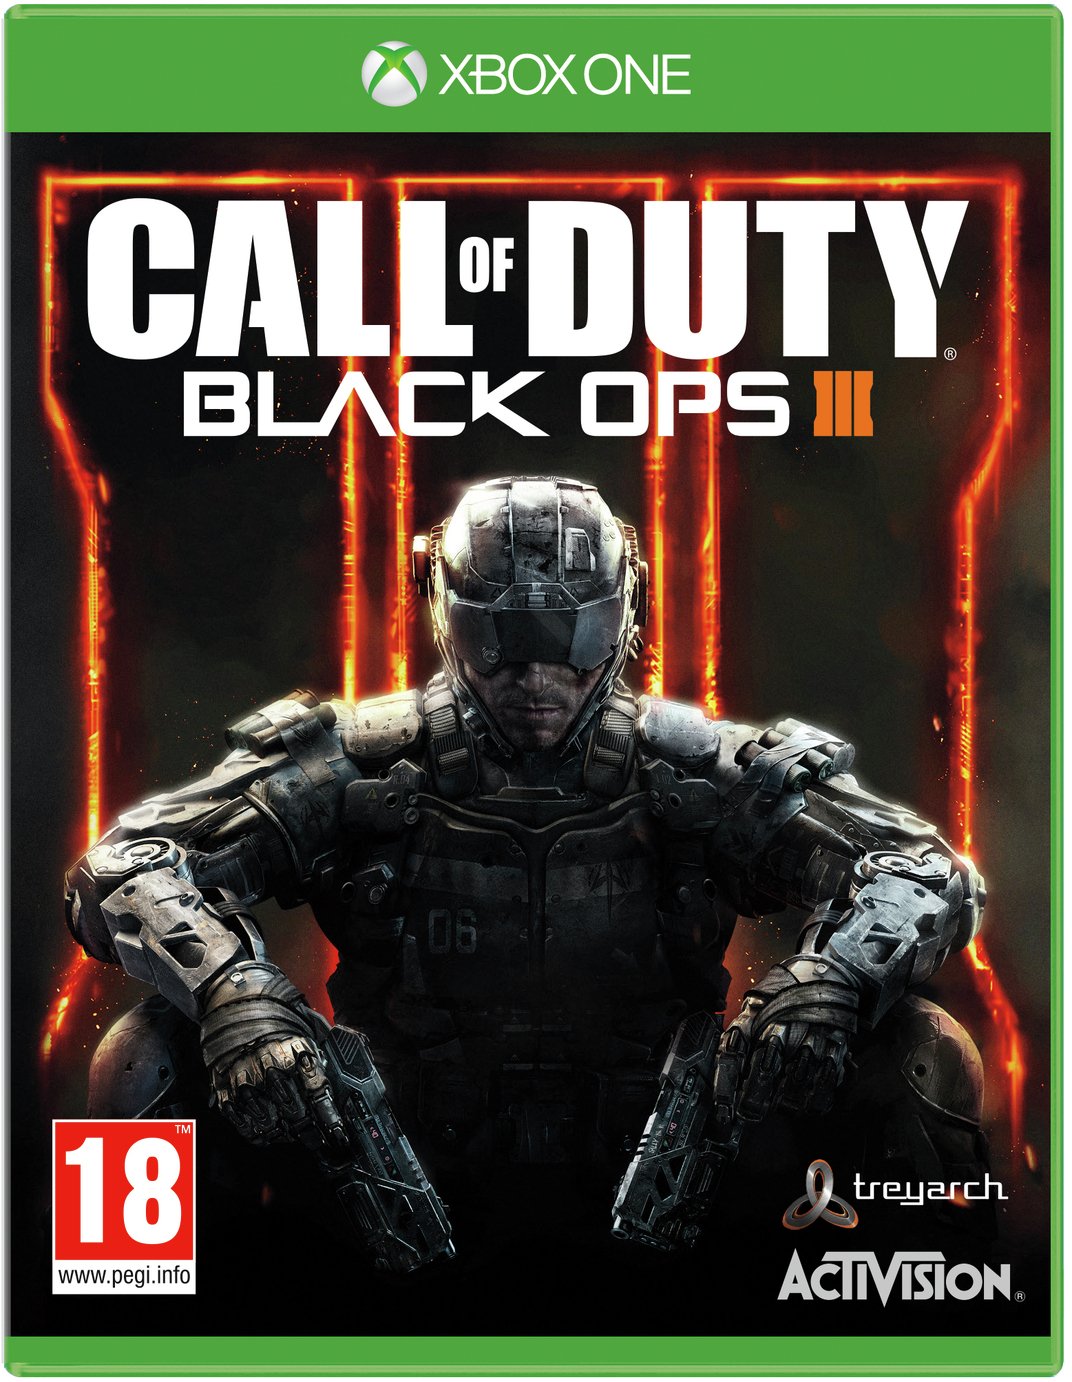 black ops 3 ps4 price